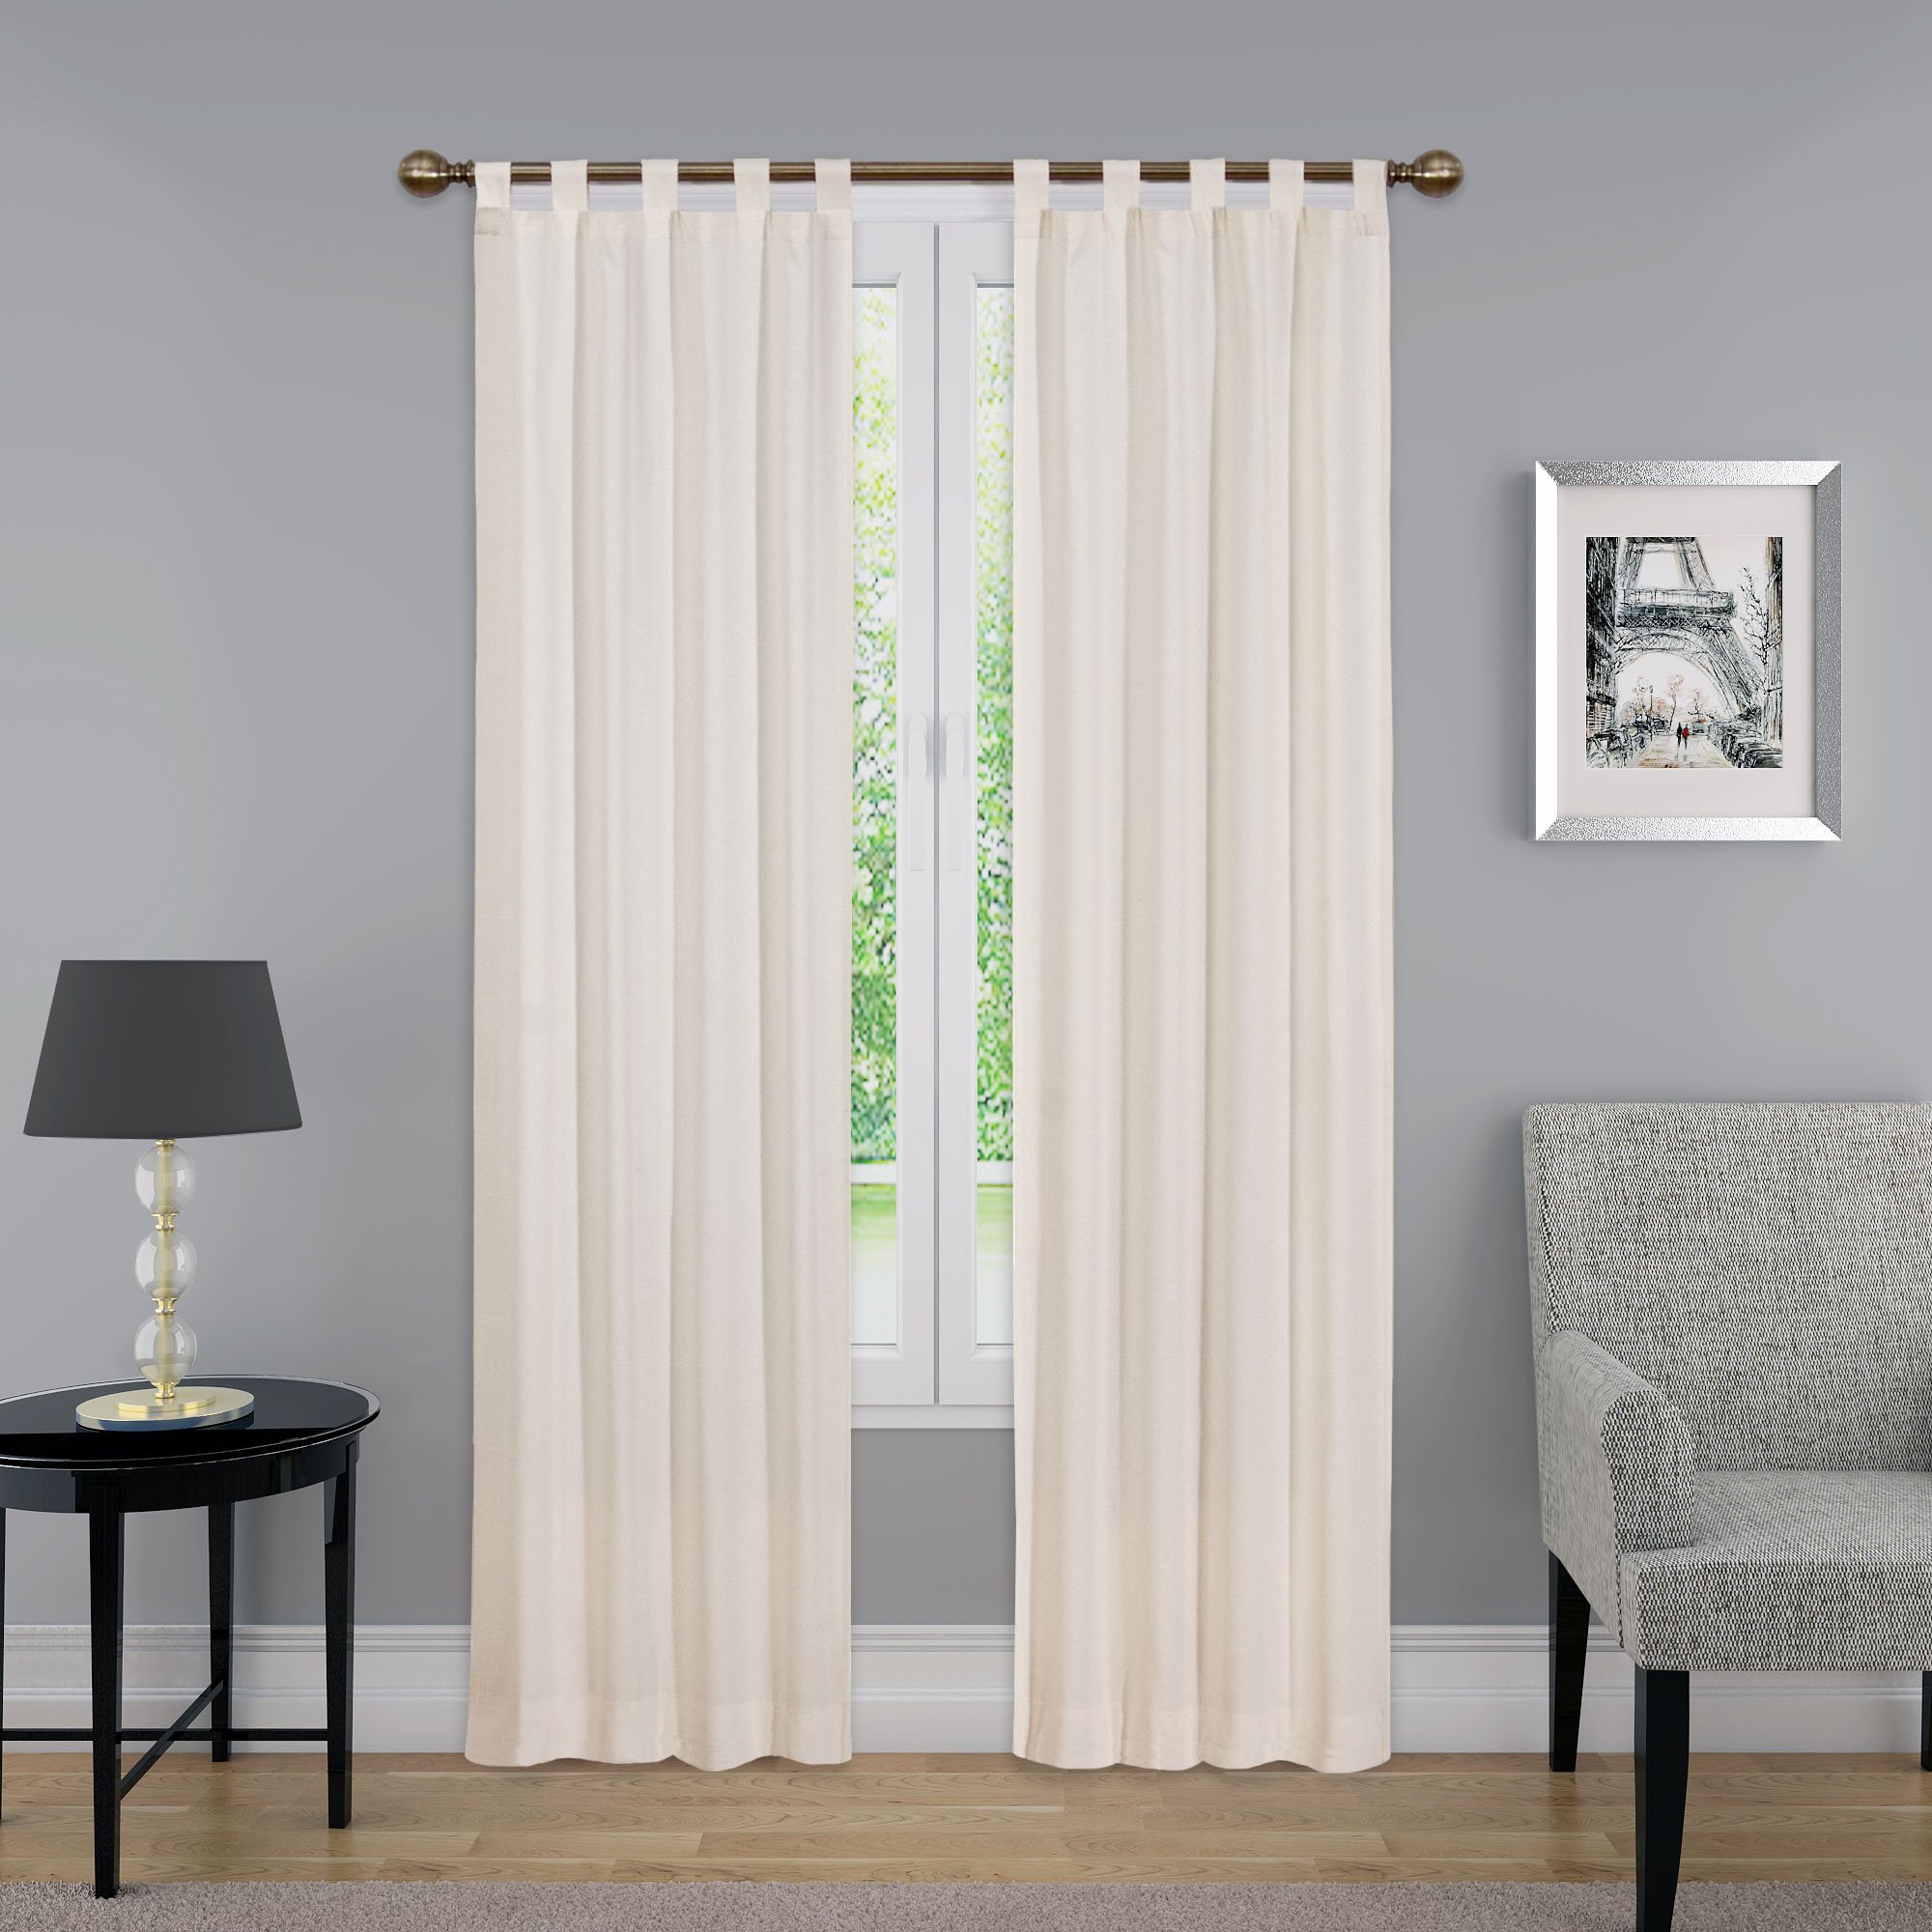 PAIRS TO GO Montana Modern Decorative Tab Top Window Curtains for Bedroom or Living Room (2 Panels), 30" x 84", Natural